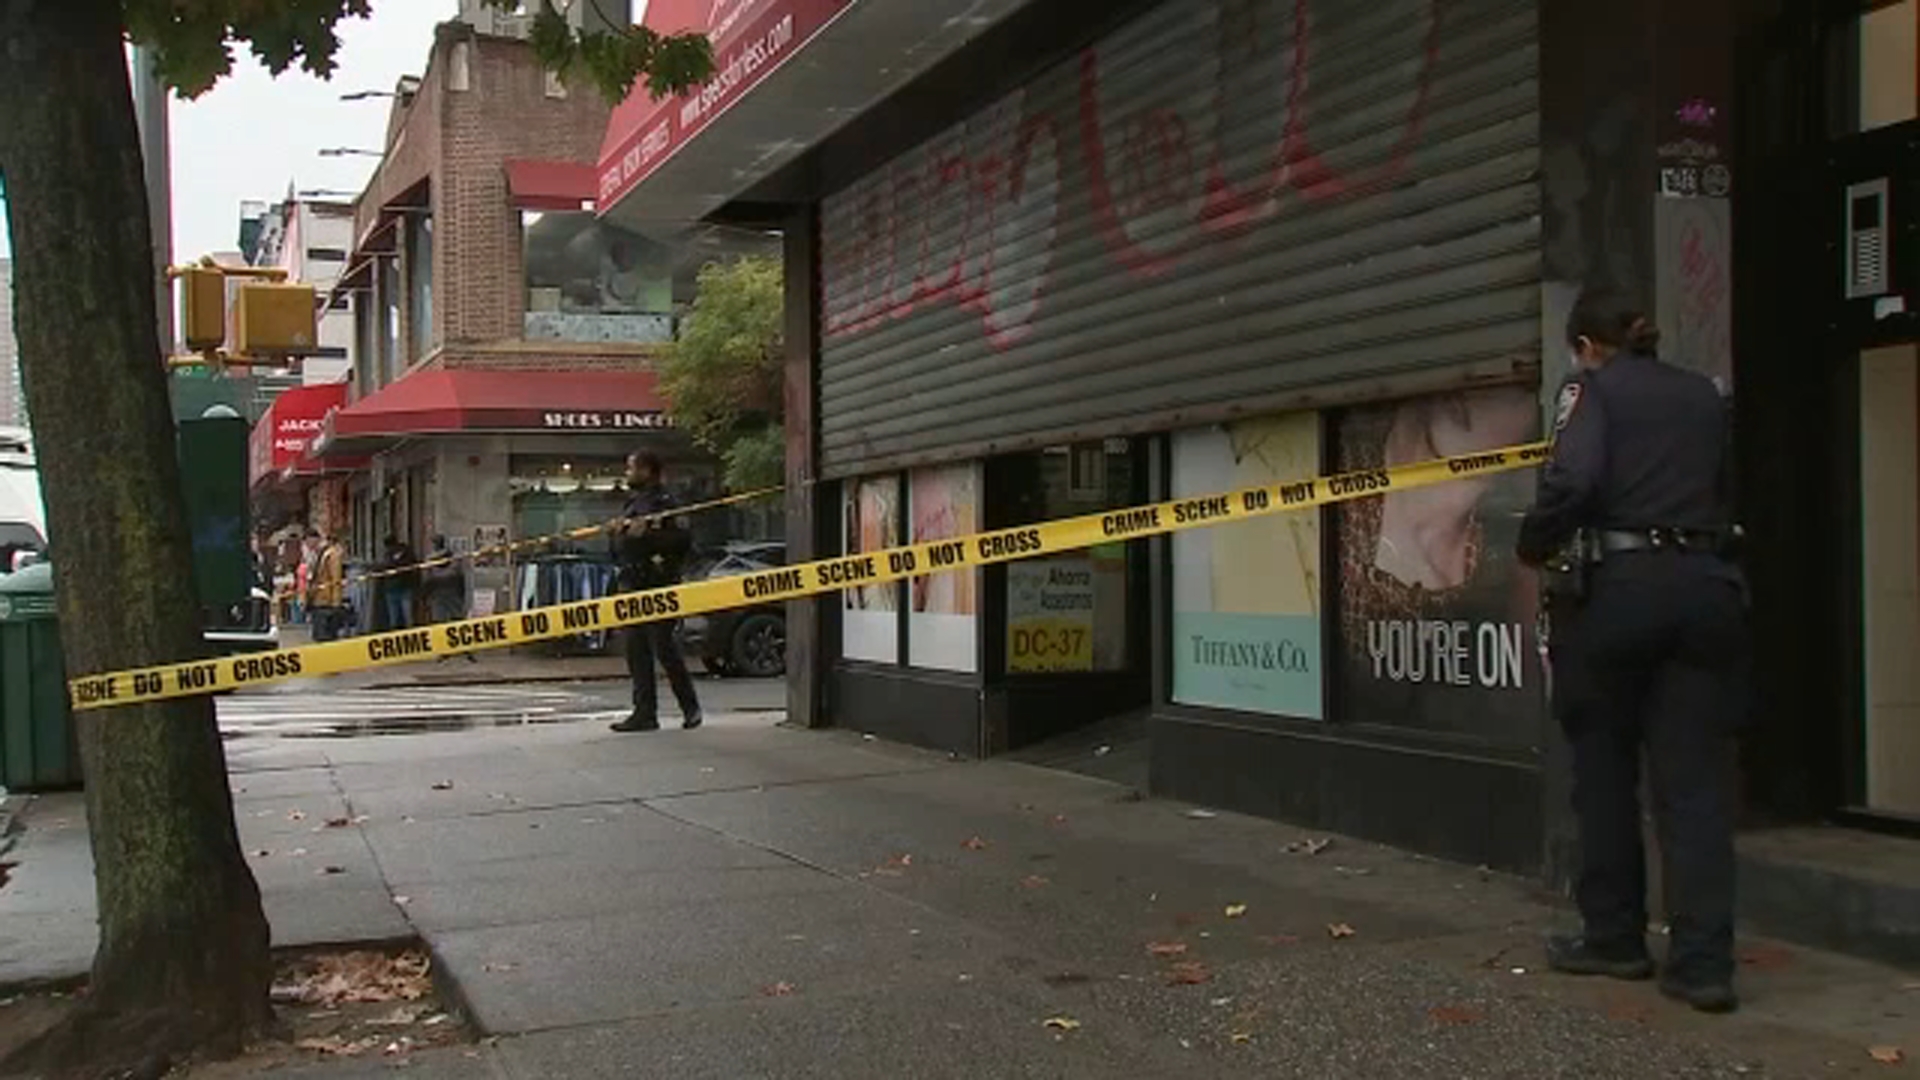 Police searching for 2 girls after 15-year-old stabbed in Manhattan